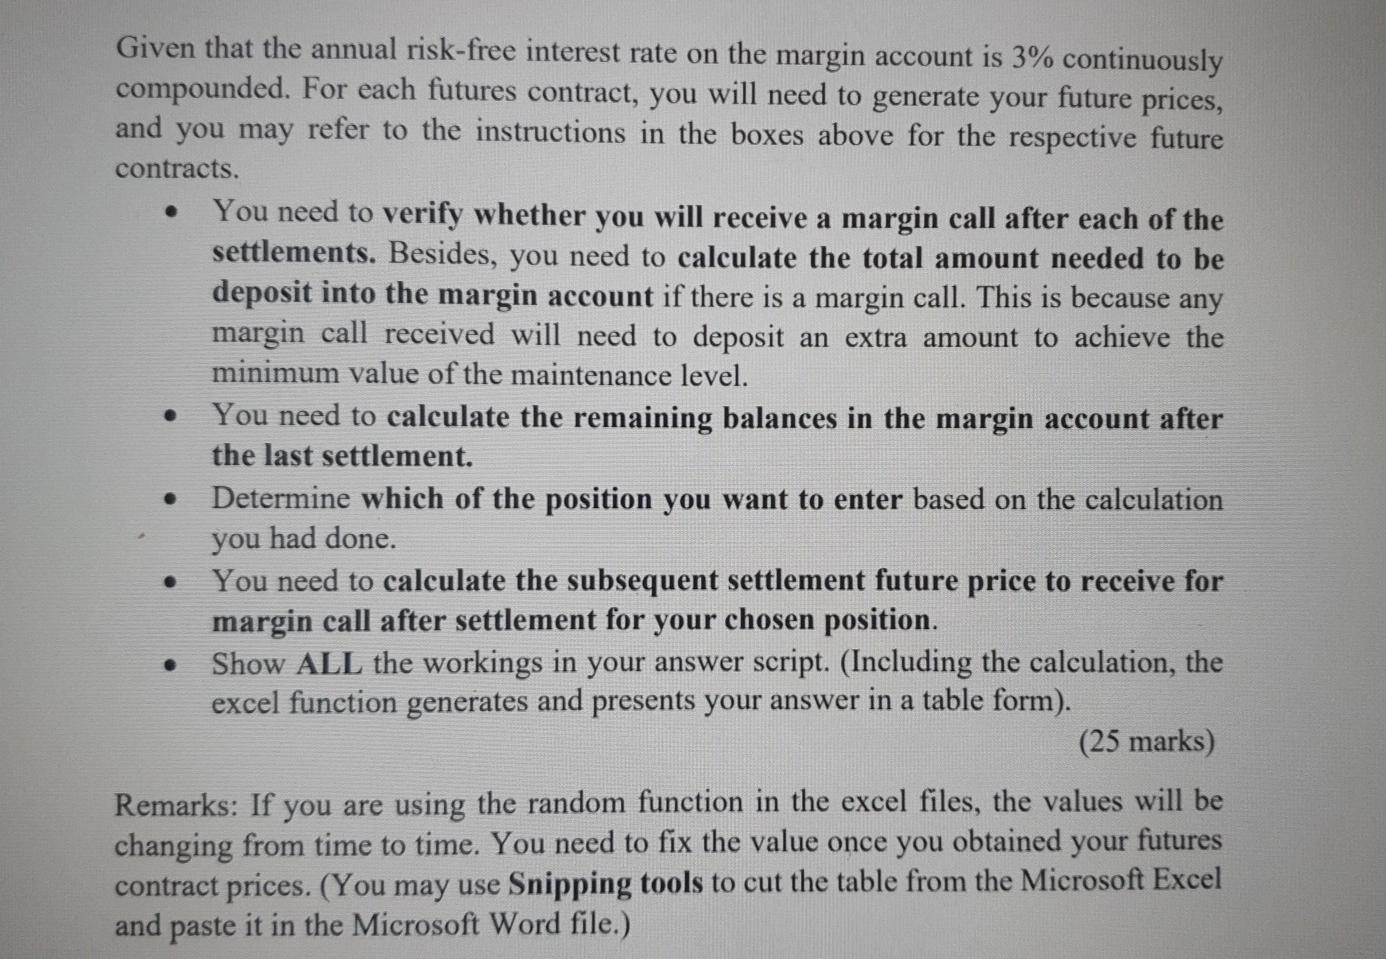 Given that the annual risk-free interest rate on the margin account is 3% continuously compounded. For each futures contract,